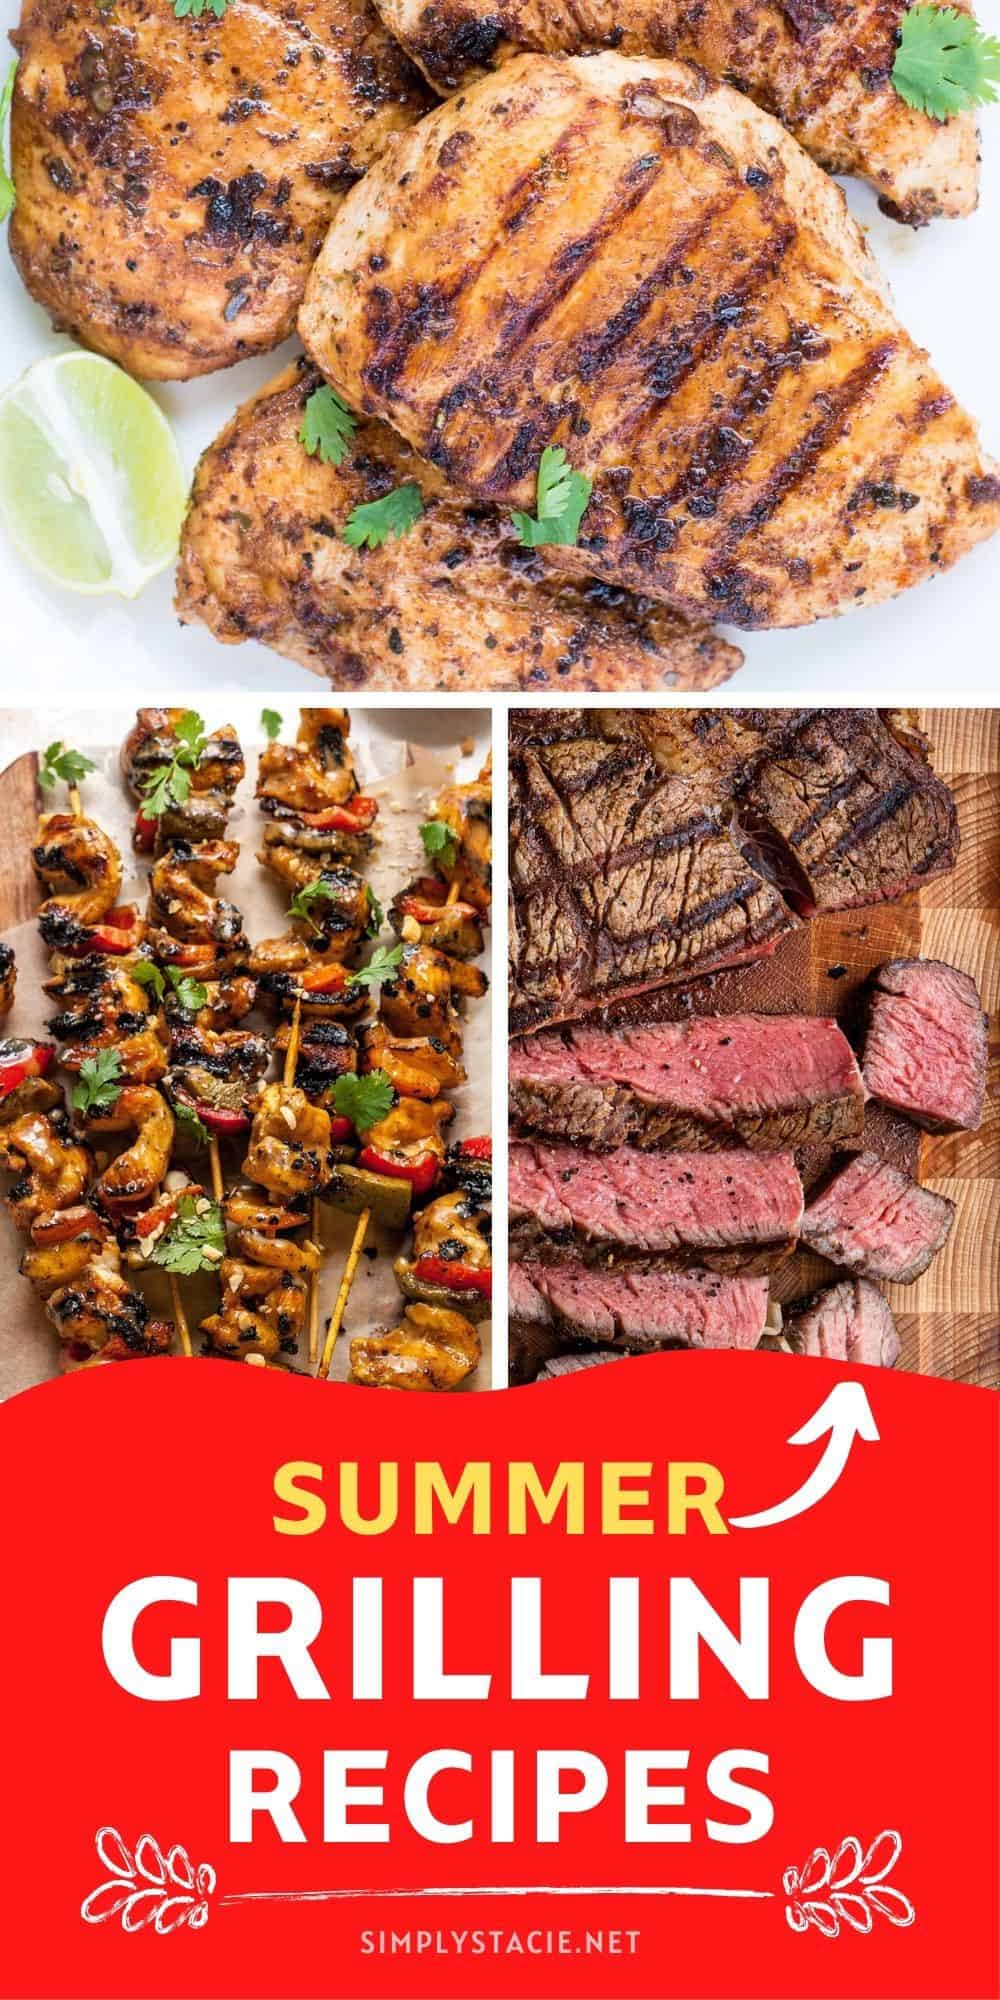 Best Summer Grilling Recipes - Fire up the BBQ and get your grill on with these delicious recipes!